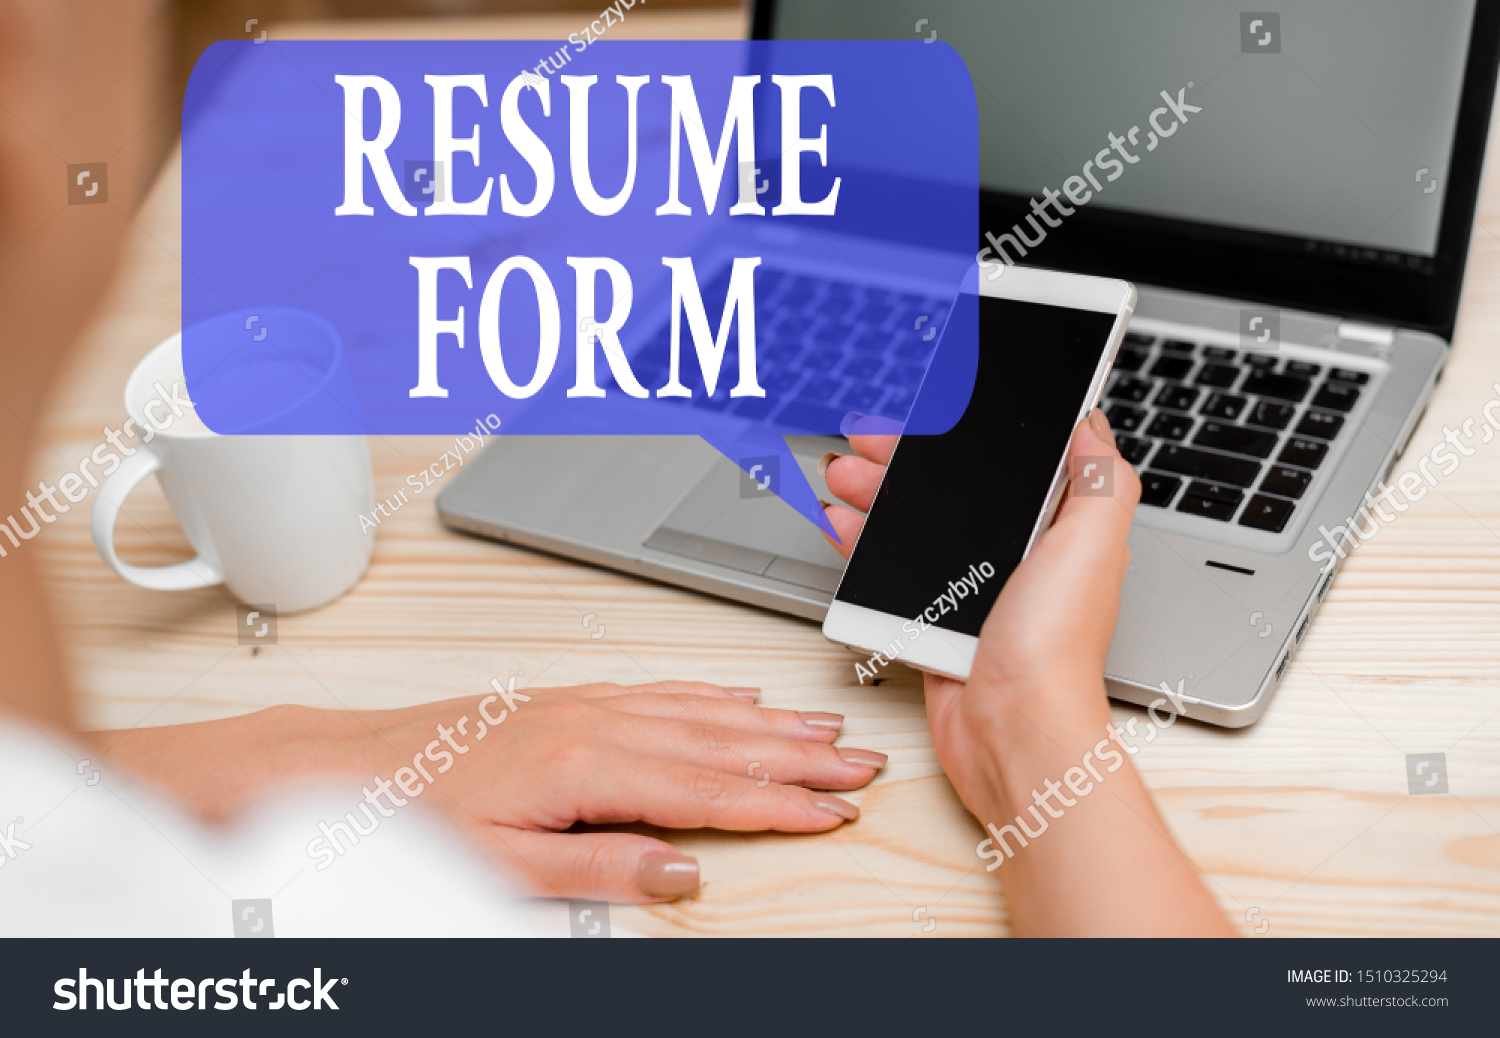 Word Writing Text Resume Form Business Stock Photo Edit Now